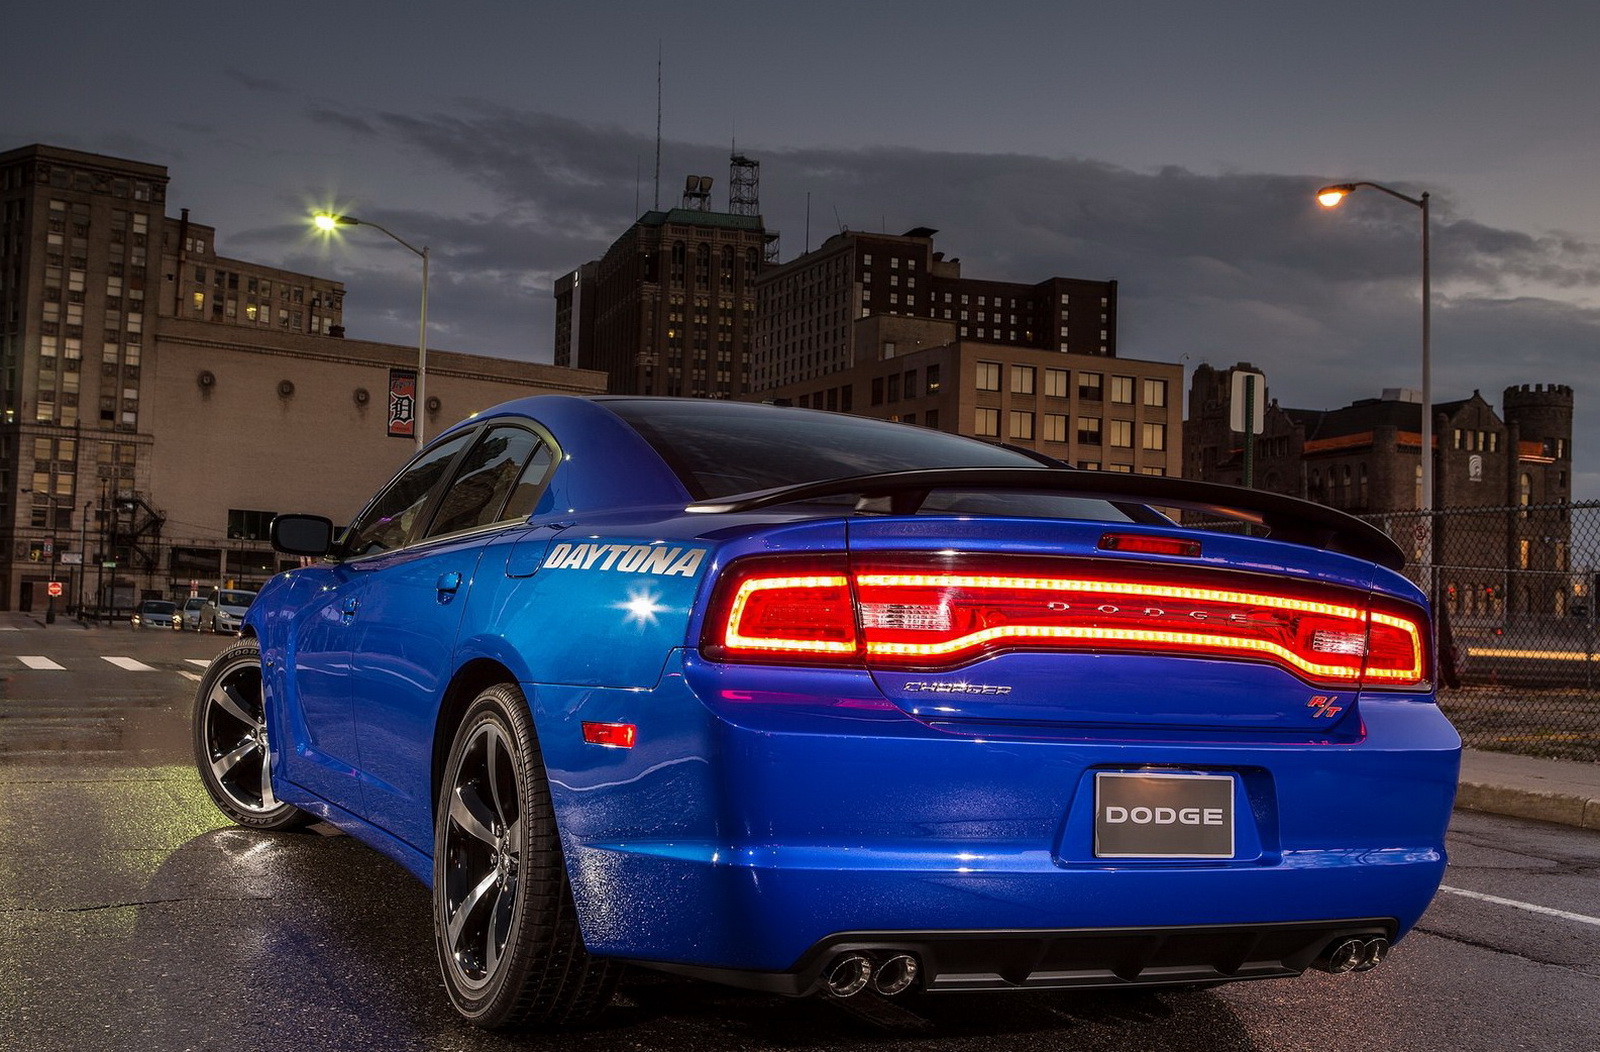 Dodge Charger wallpapers for desktop, download free Dodge Charger pictures  and backgrounds for PC 